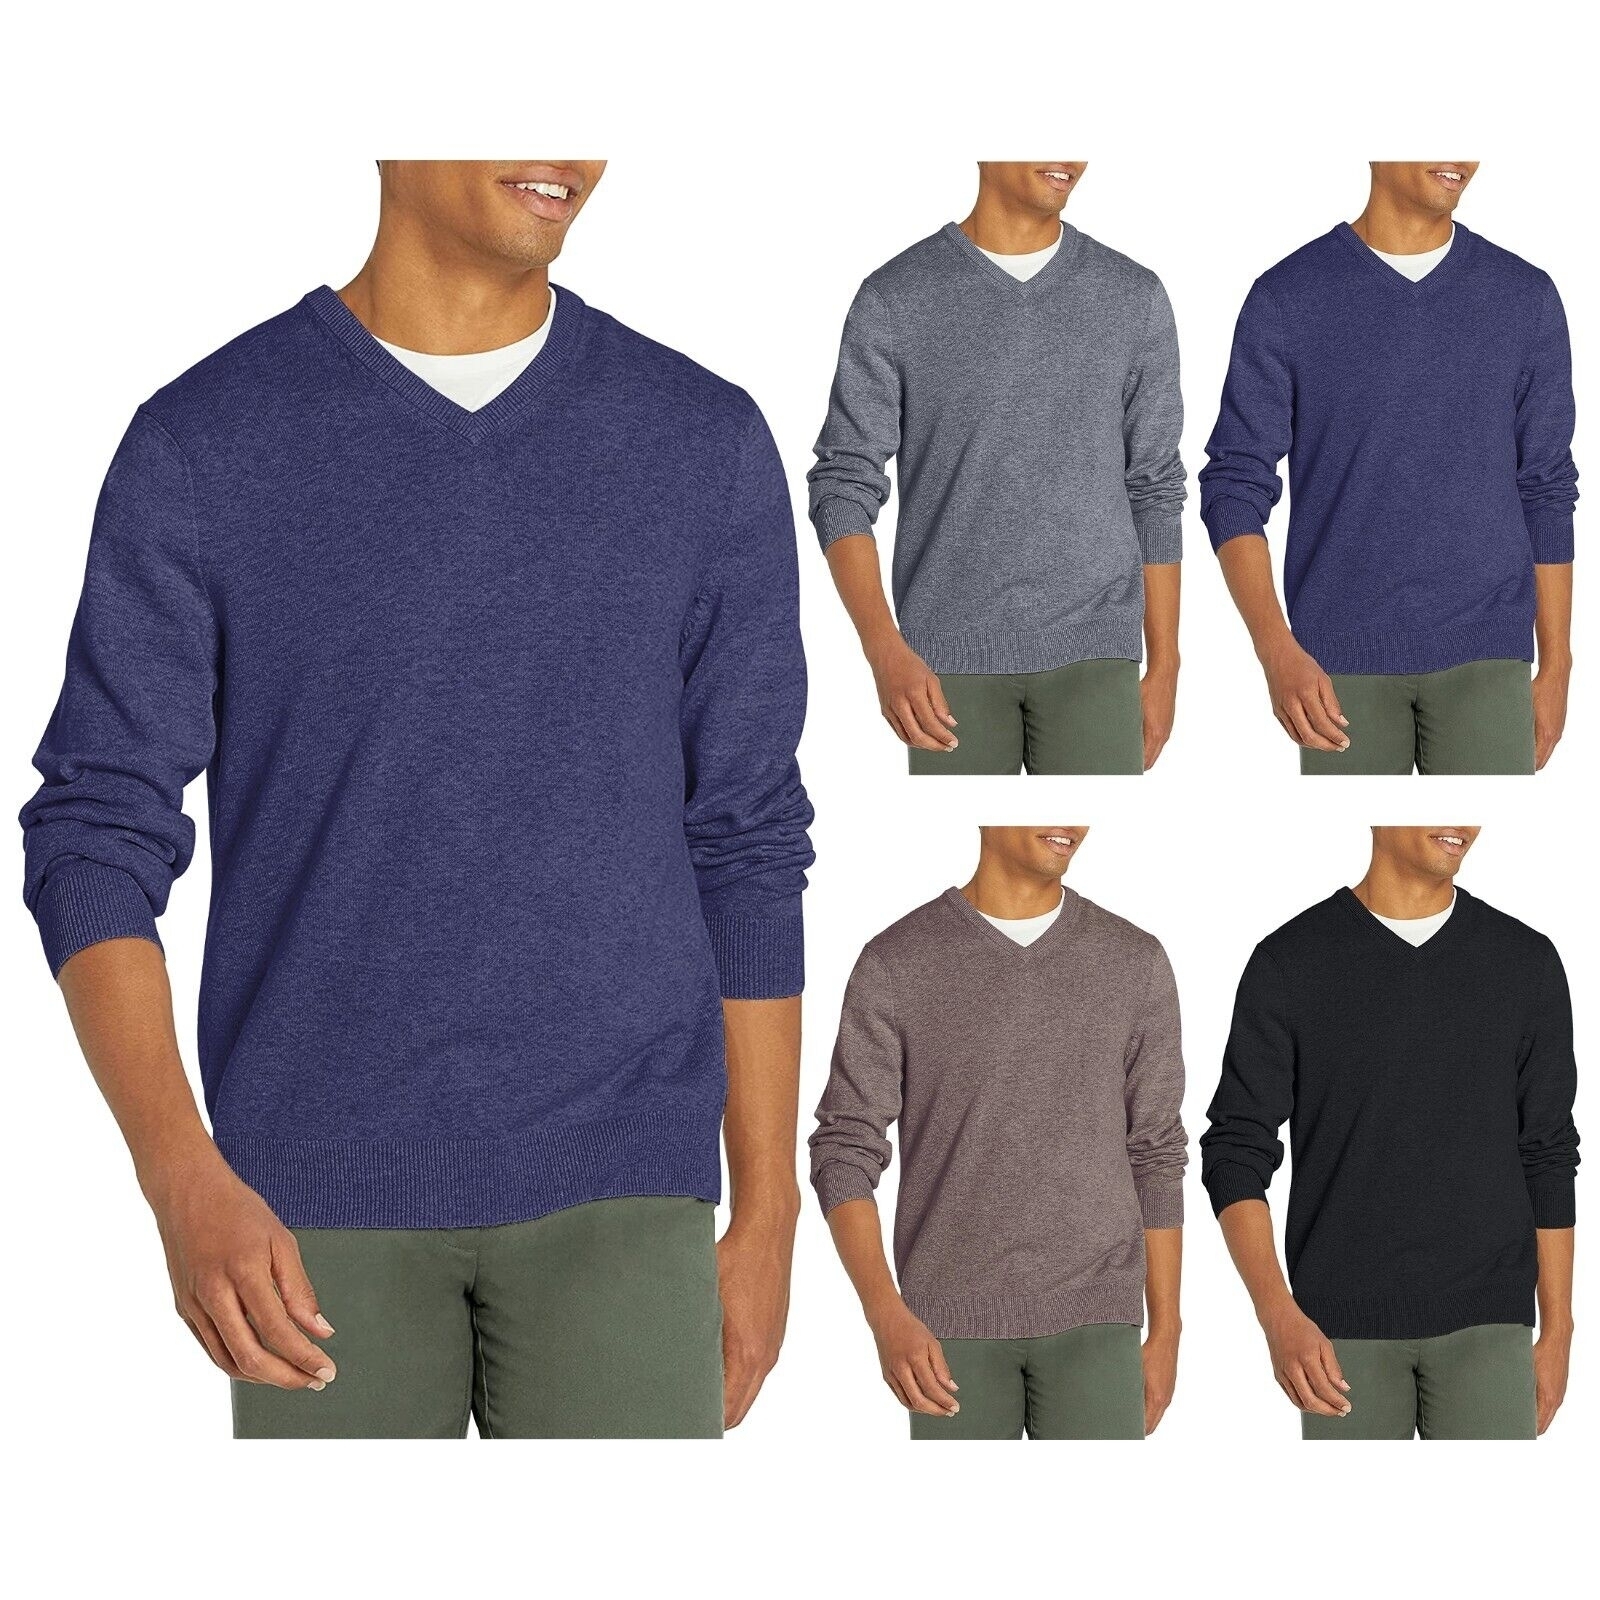 3-Pack Men's Casual Cozy Ultra Soft Slim Fit Warm Knit Pullover V-Neck Sweater - Large